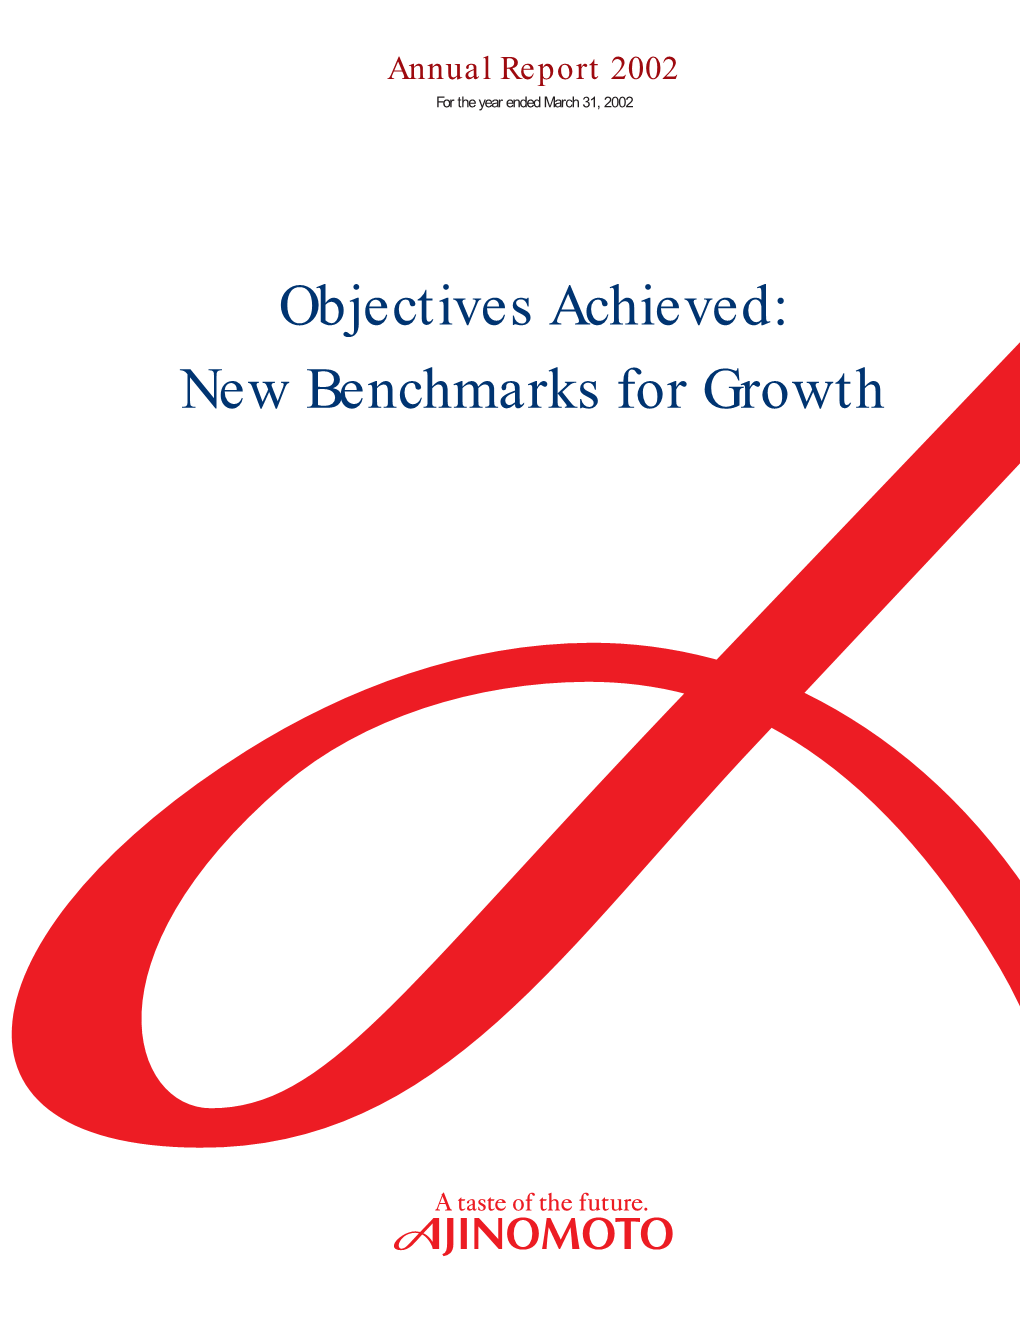 Objectives Achieved: New Benchmarks for Growth Profile